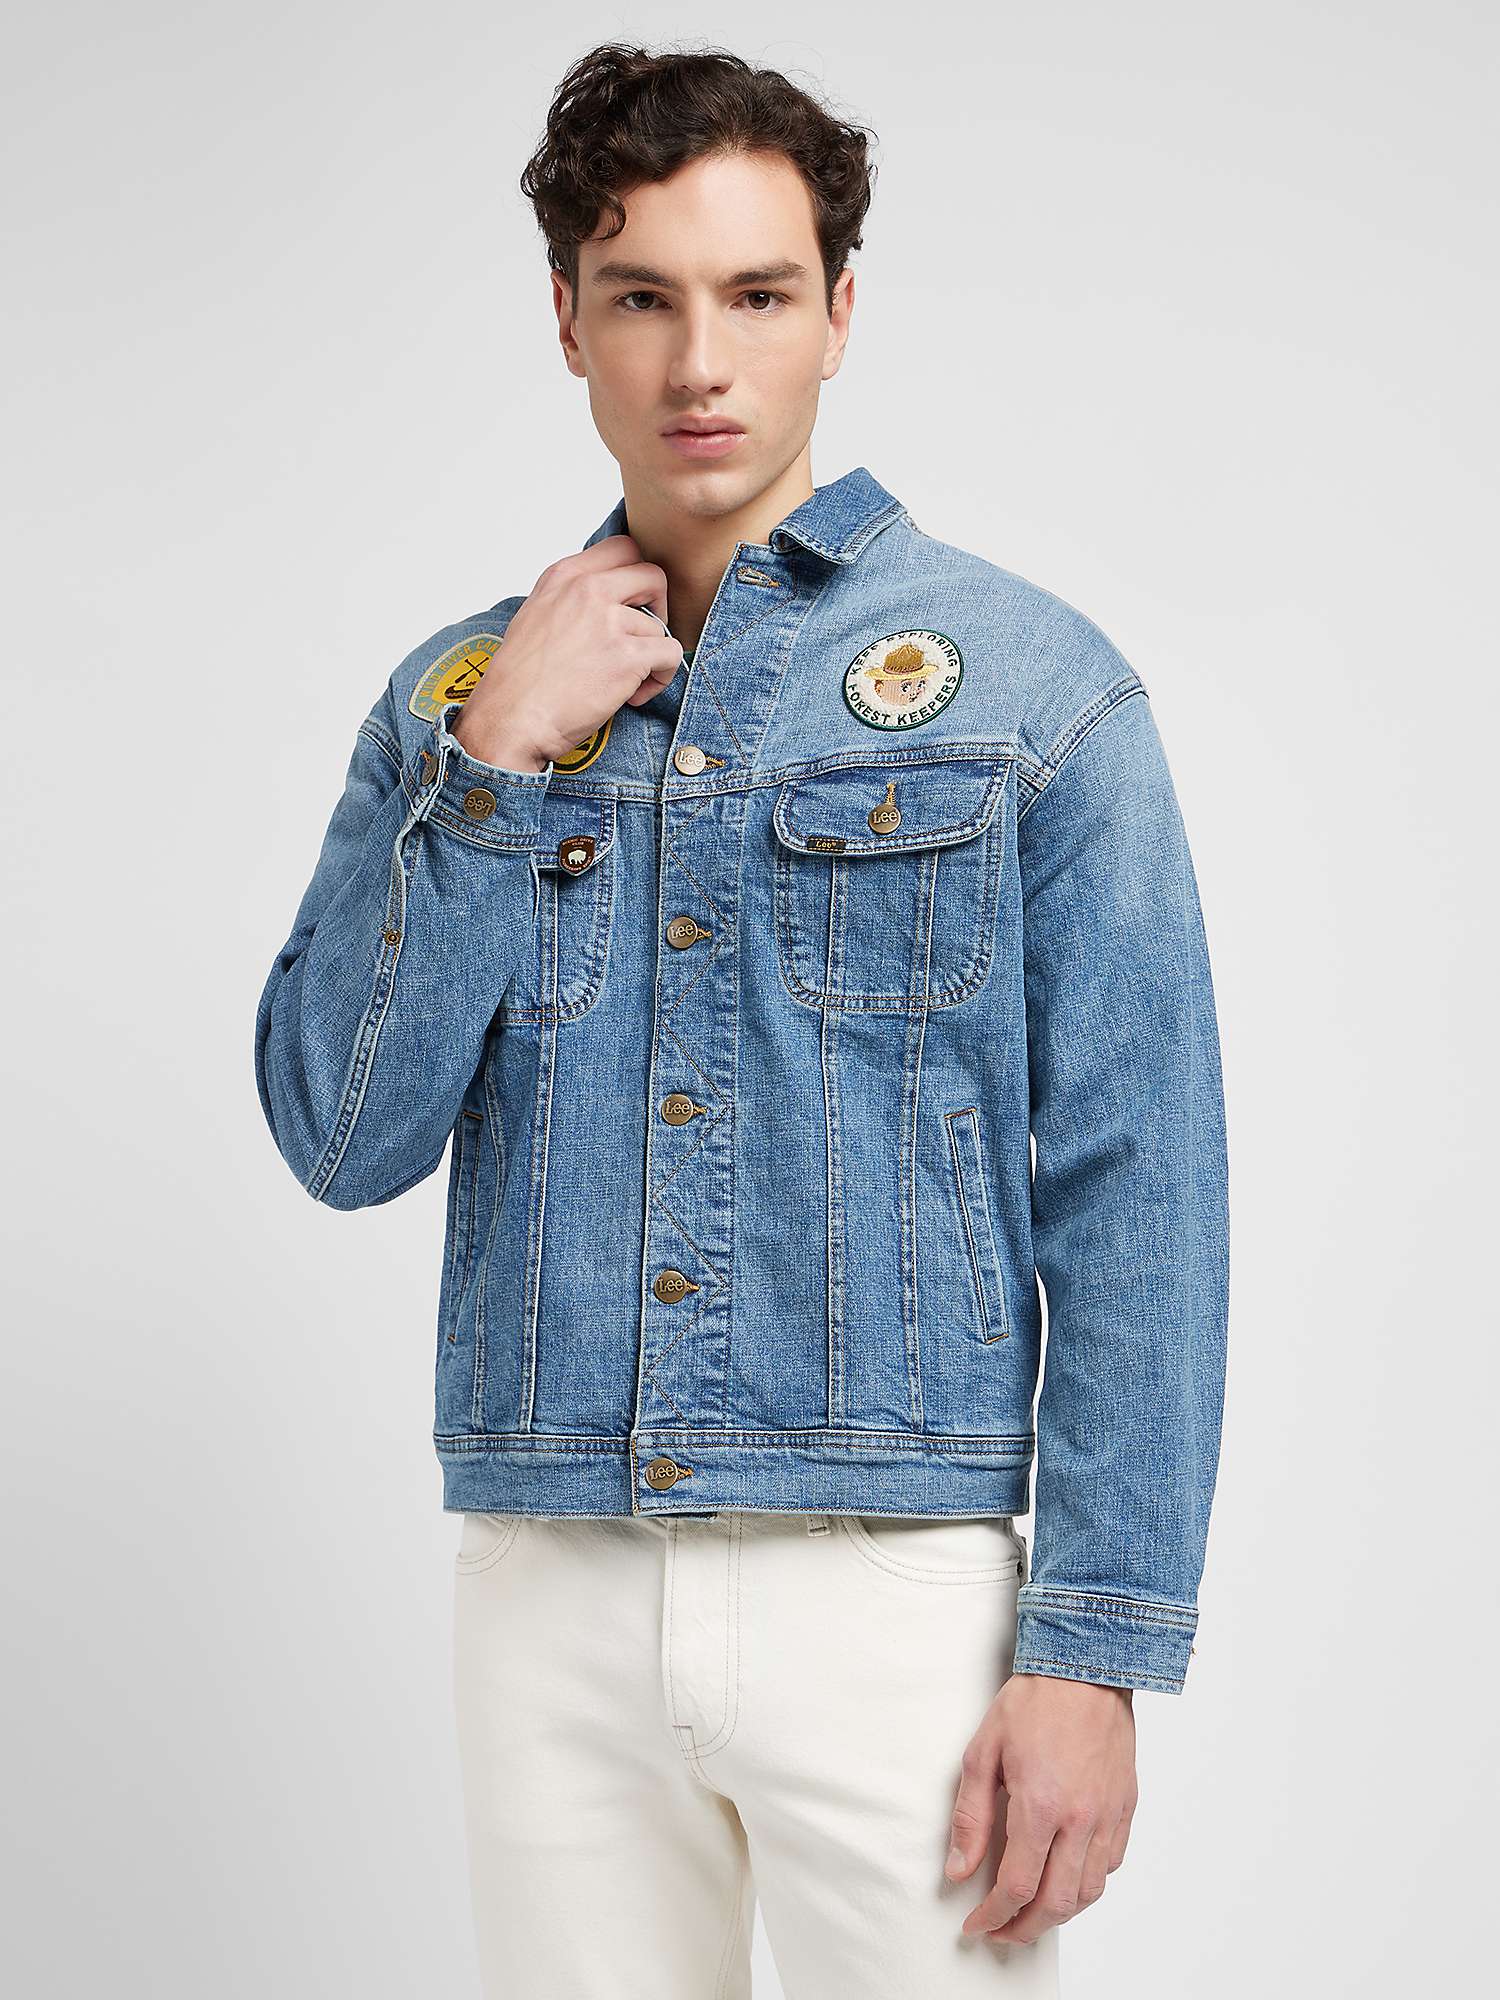 Buy Lee Relaxed Rider Jacket, Blue Online at johnlewis.com